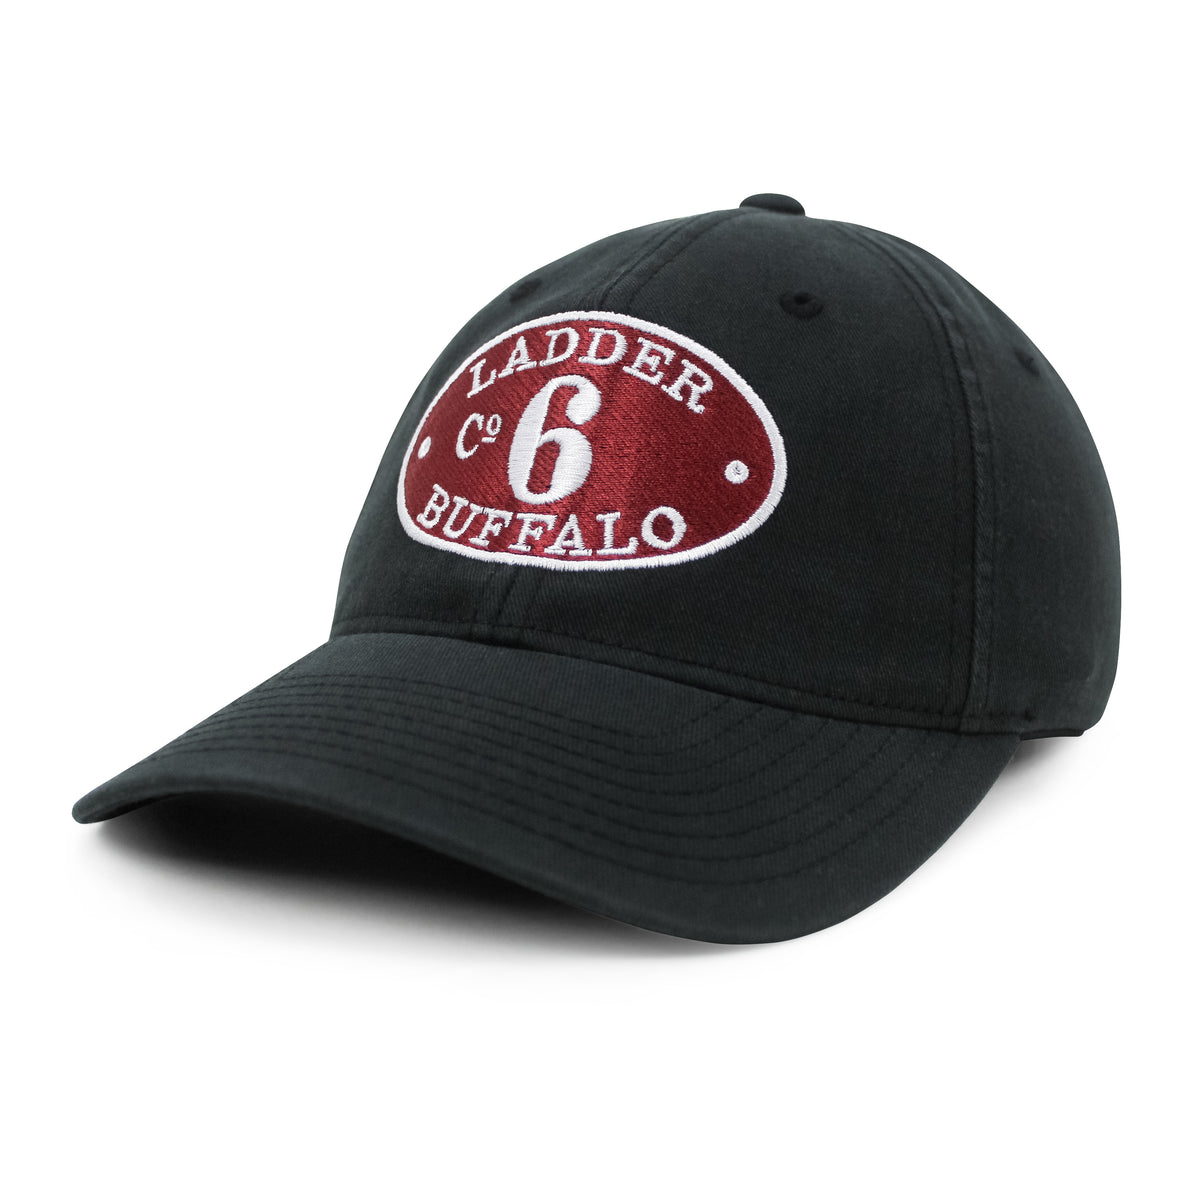 Flexfit 6997 Garment Washed Hat (Flexible Fitted) w/ Fire Mark Design